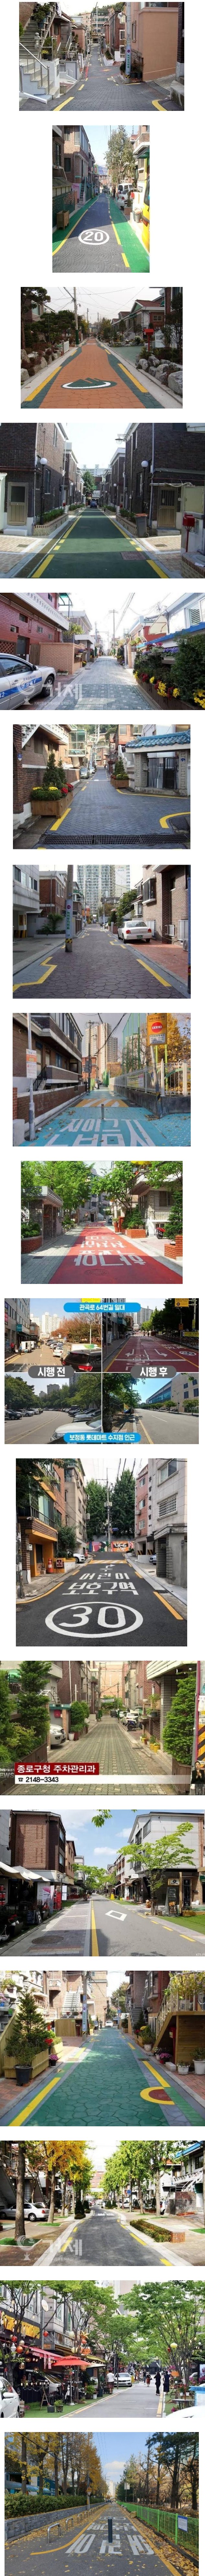 Streets in Korea Without Illegal Parking